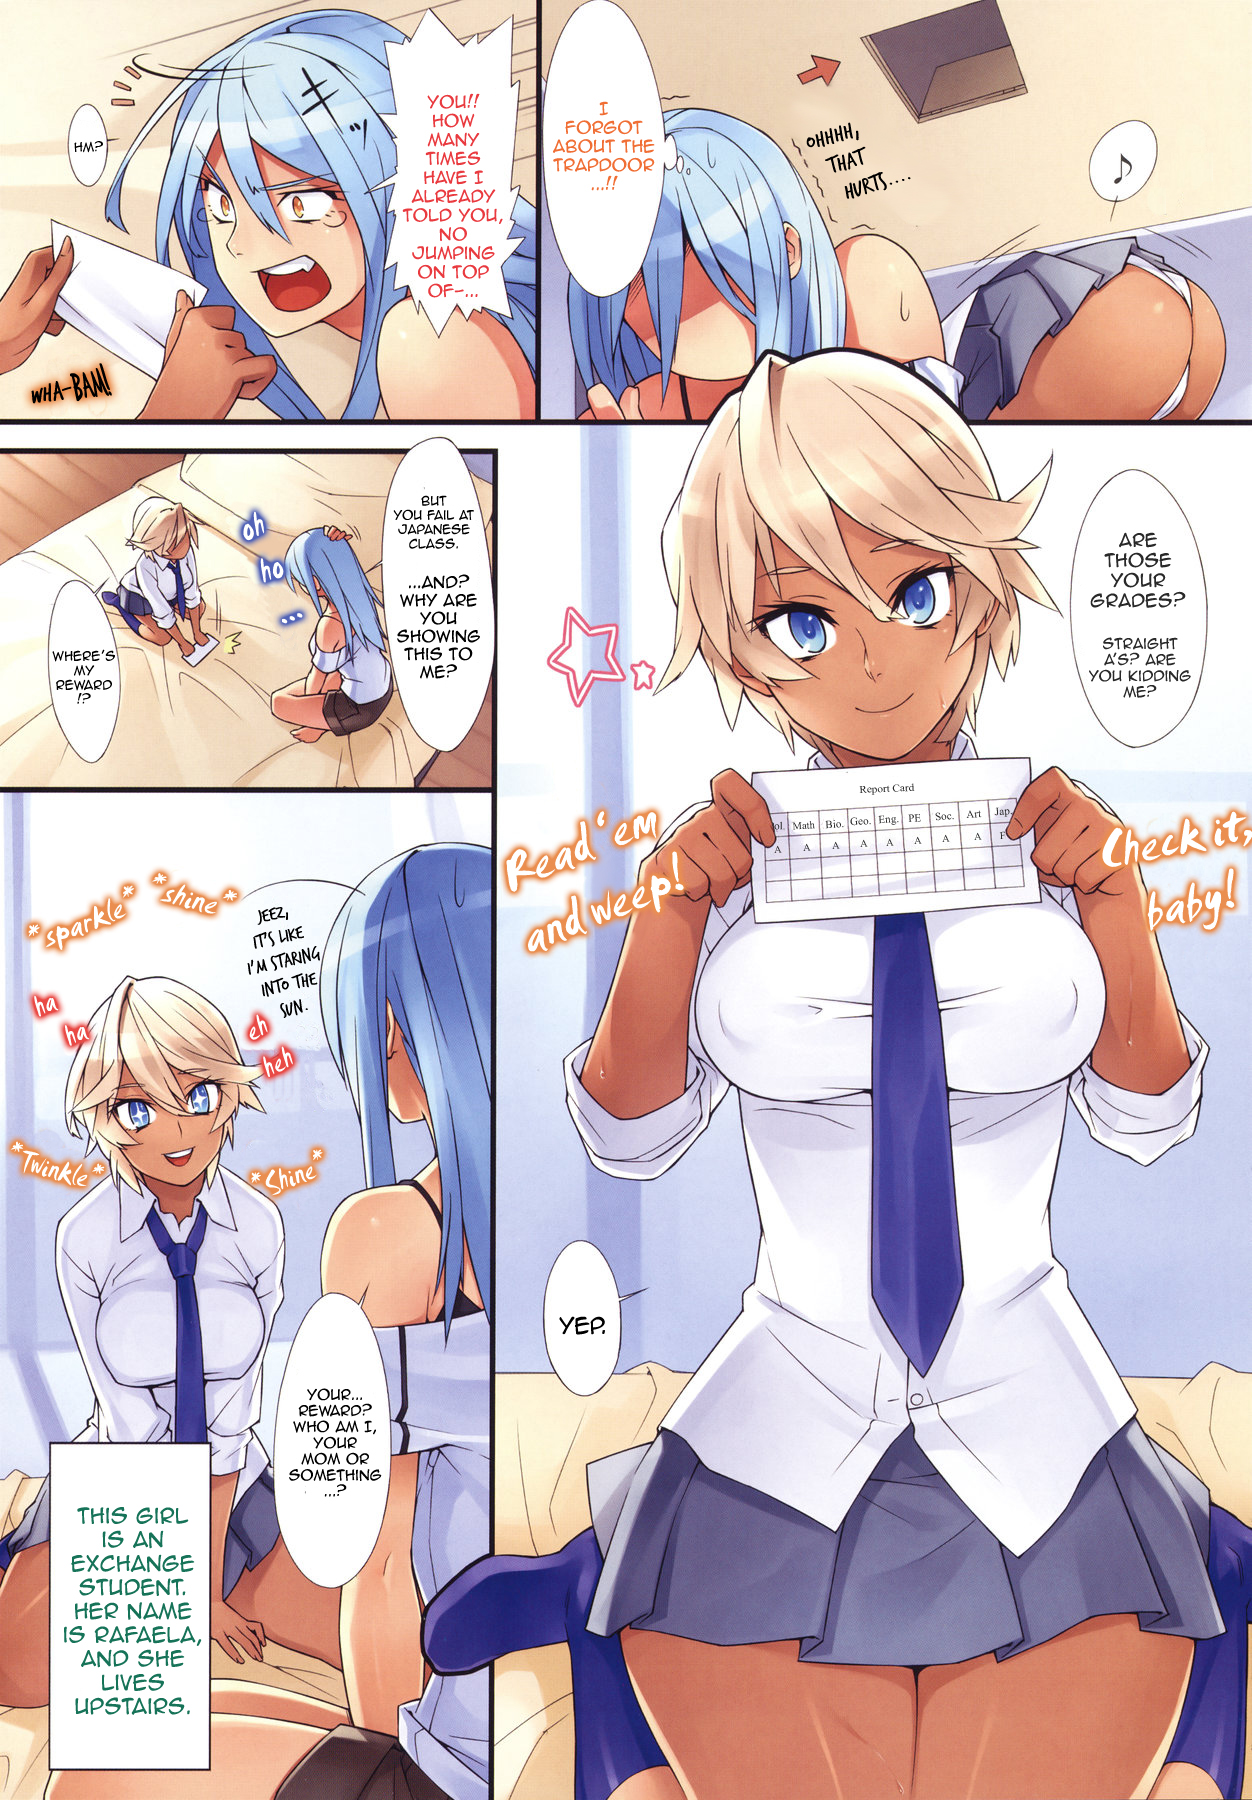 Summer Vacation - Page 2 - HentaiEra